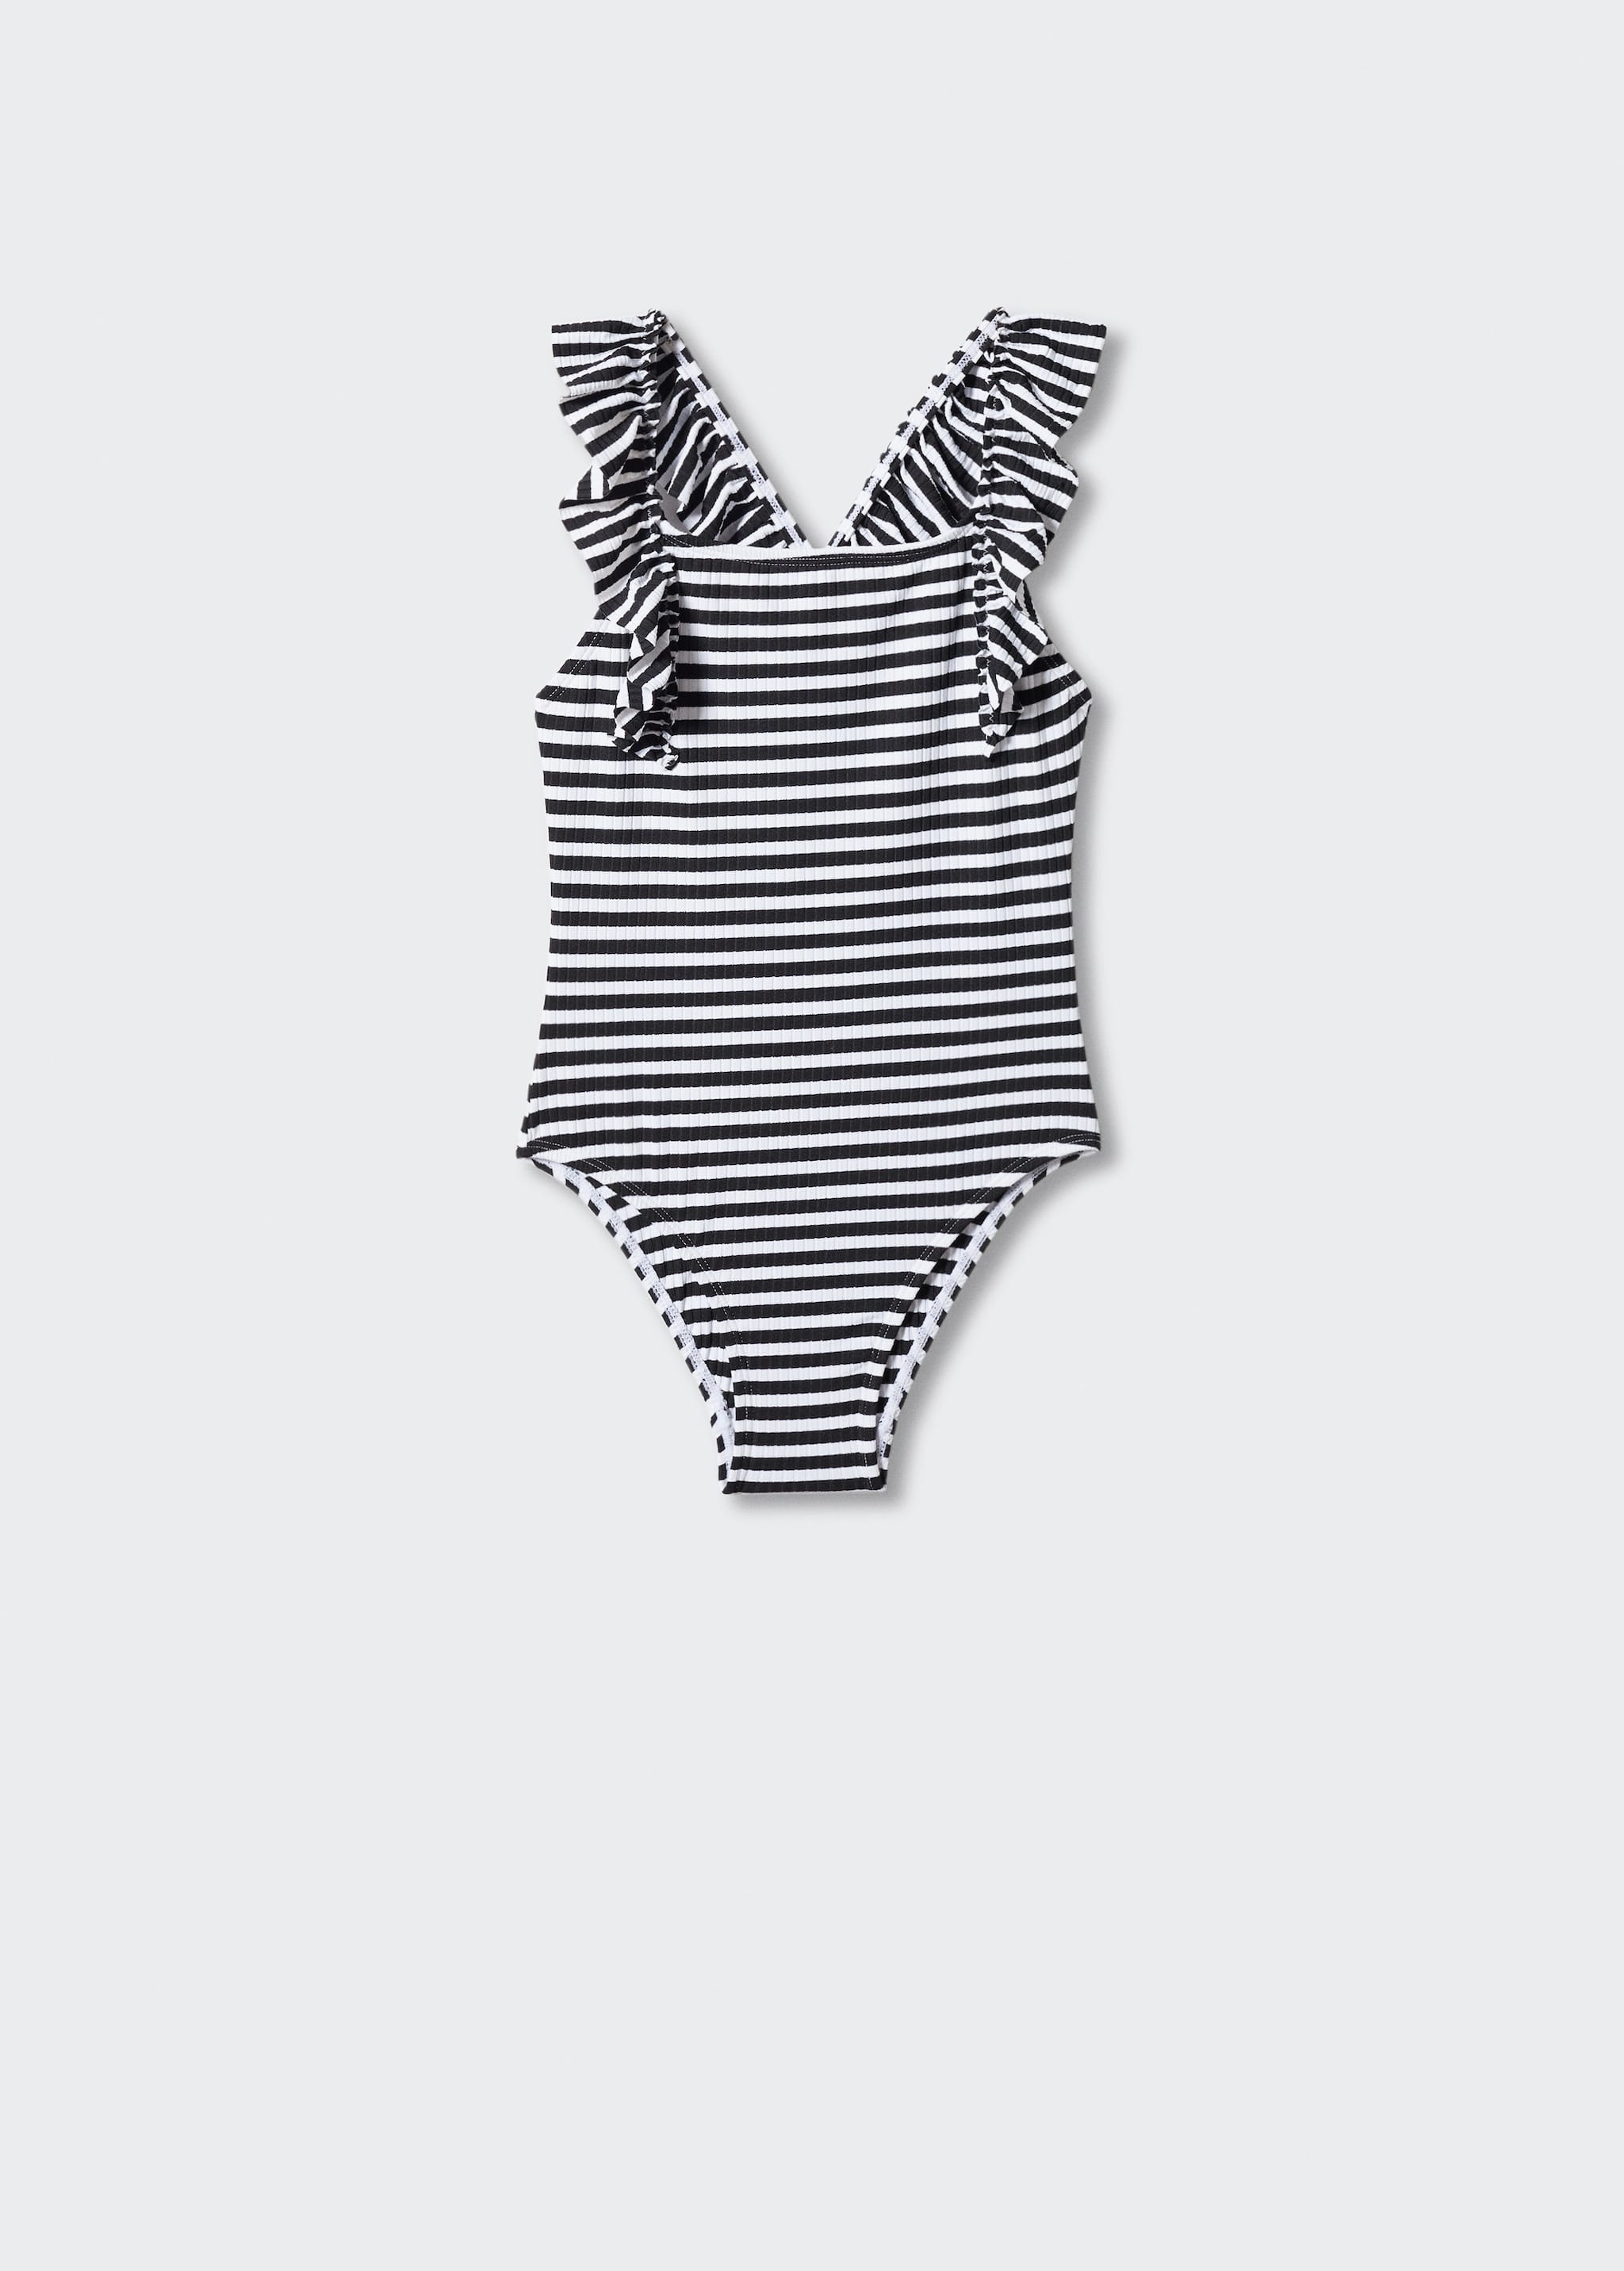 Ruffle striped swimsuit - Article without model